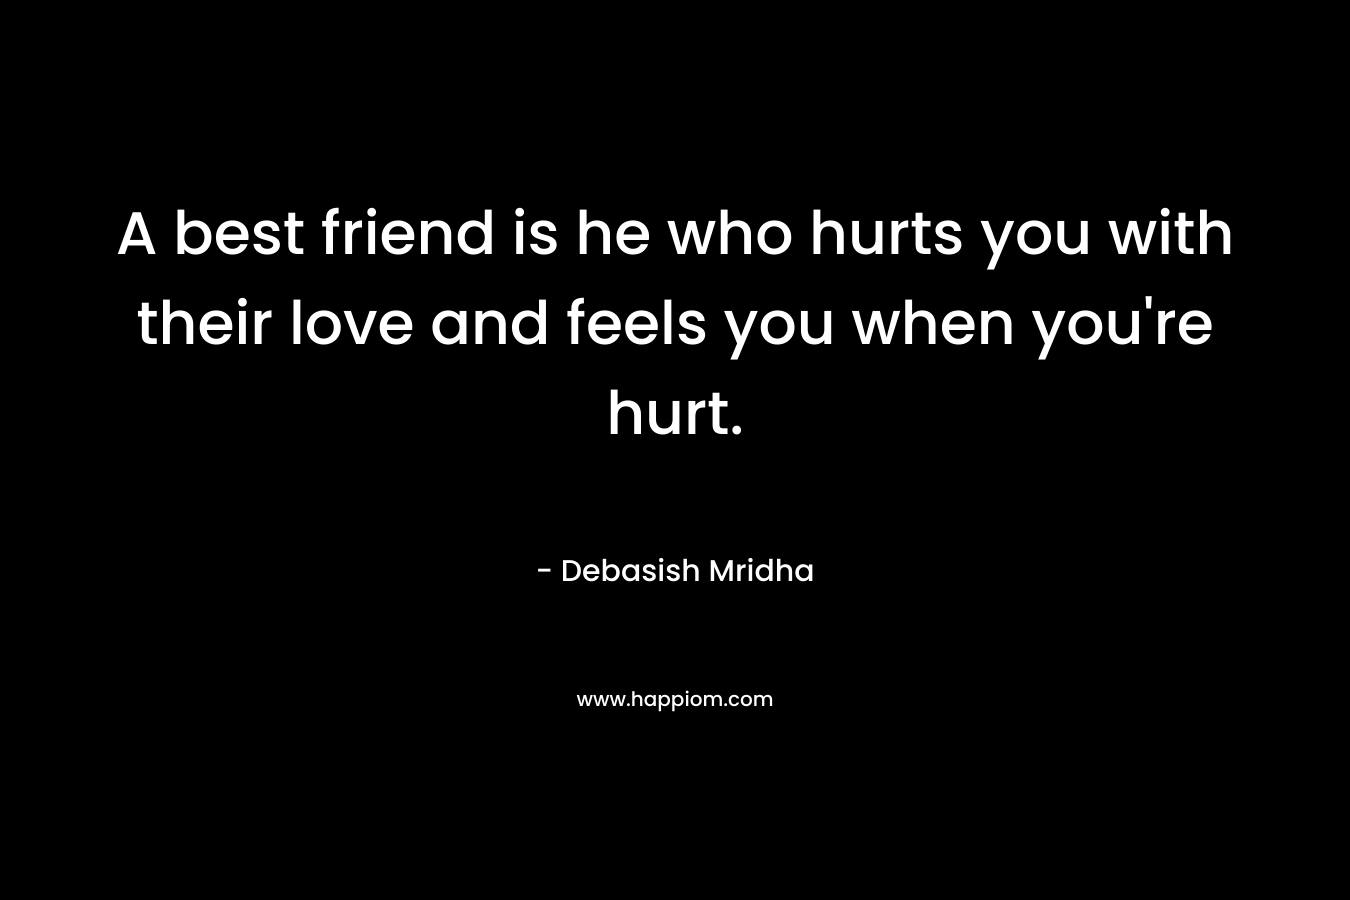 A best friend is he who hurts you with their love and feels you when you're hurt.